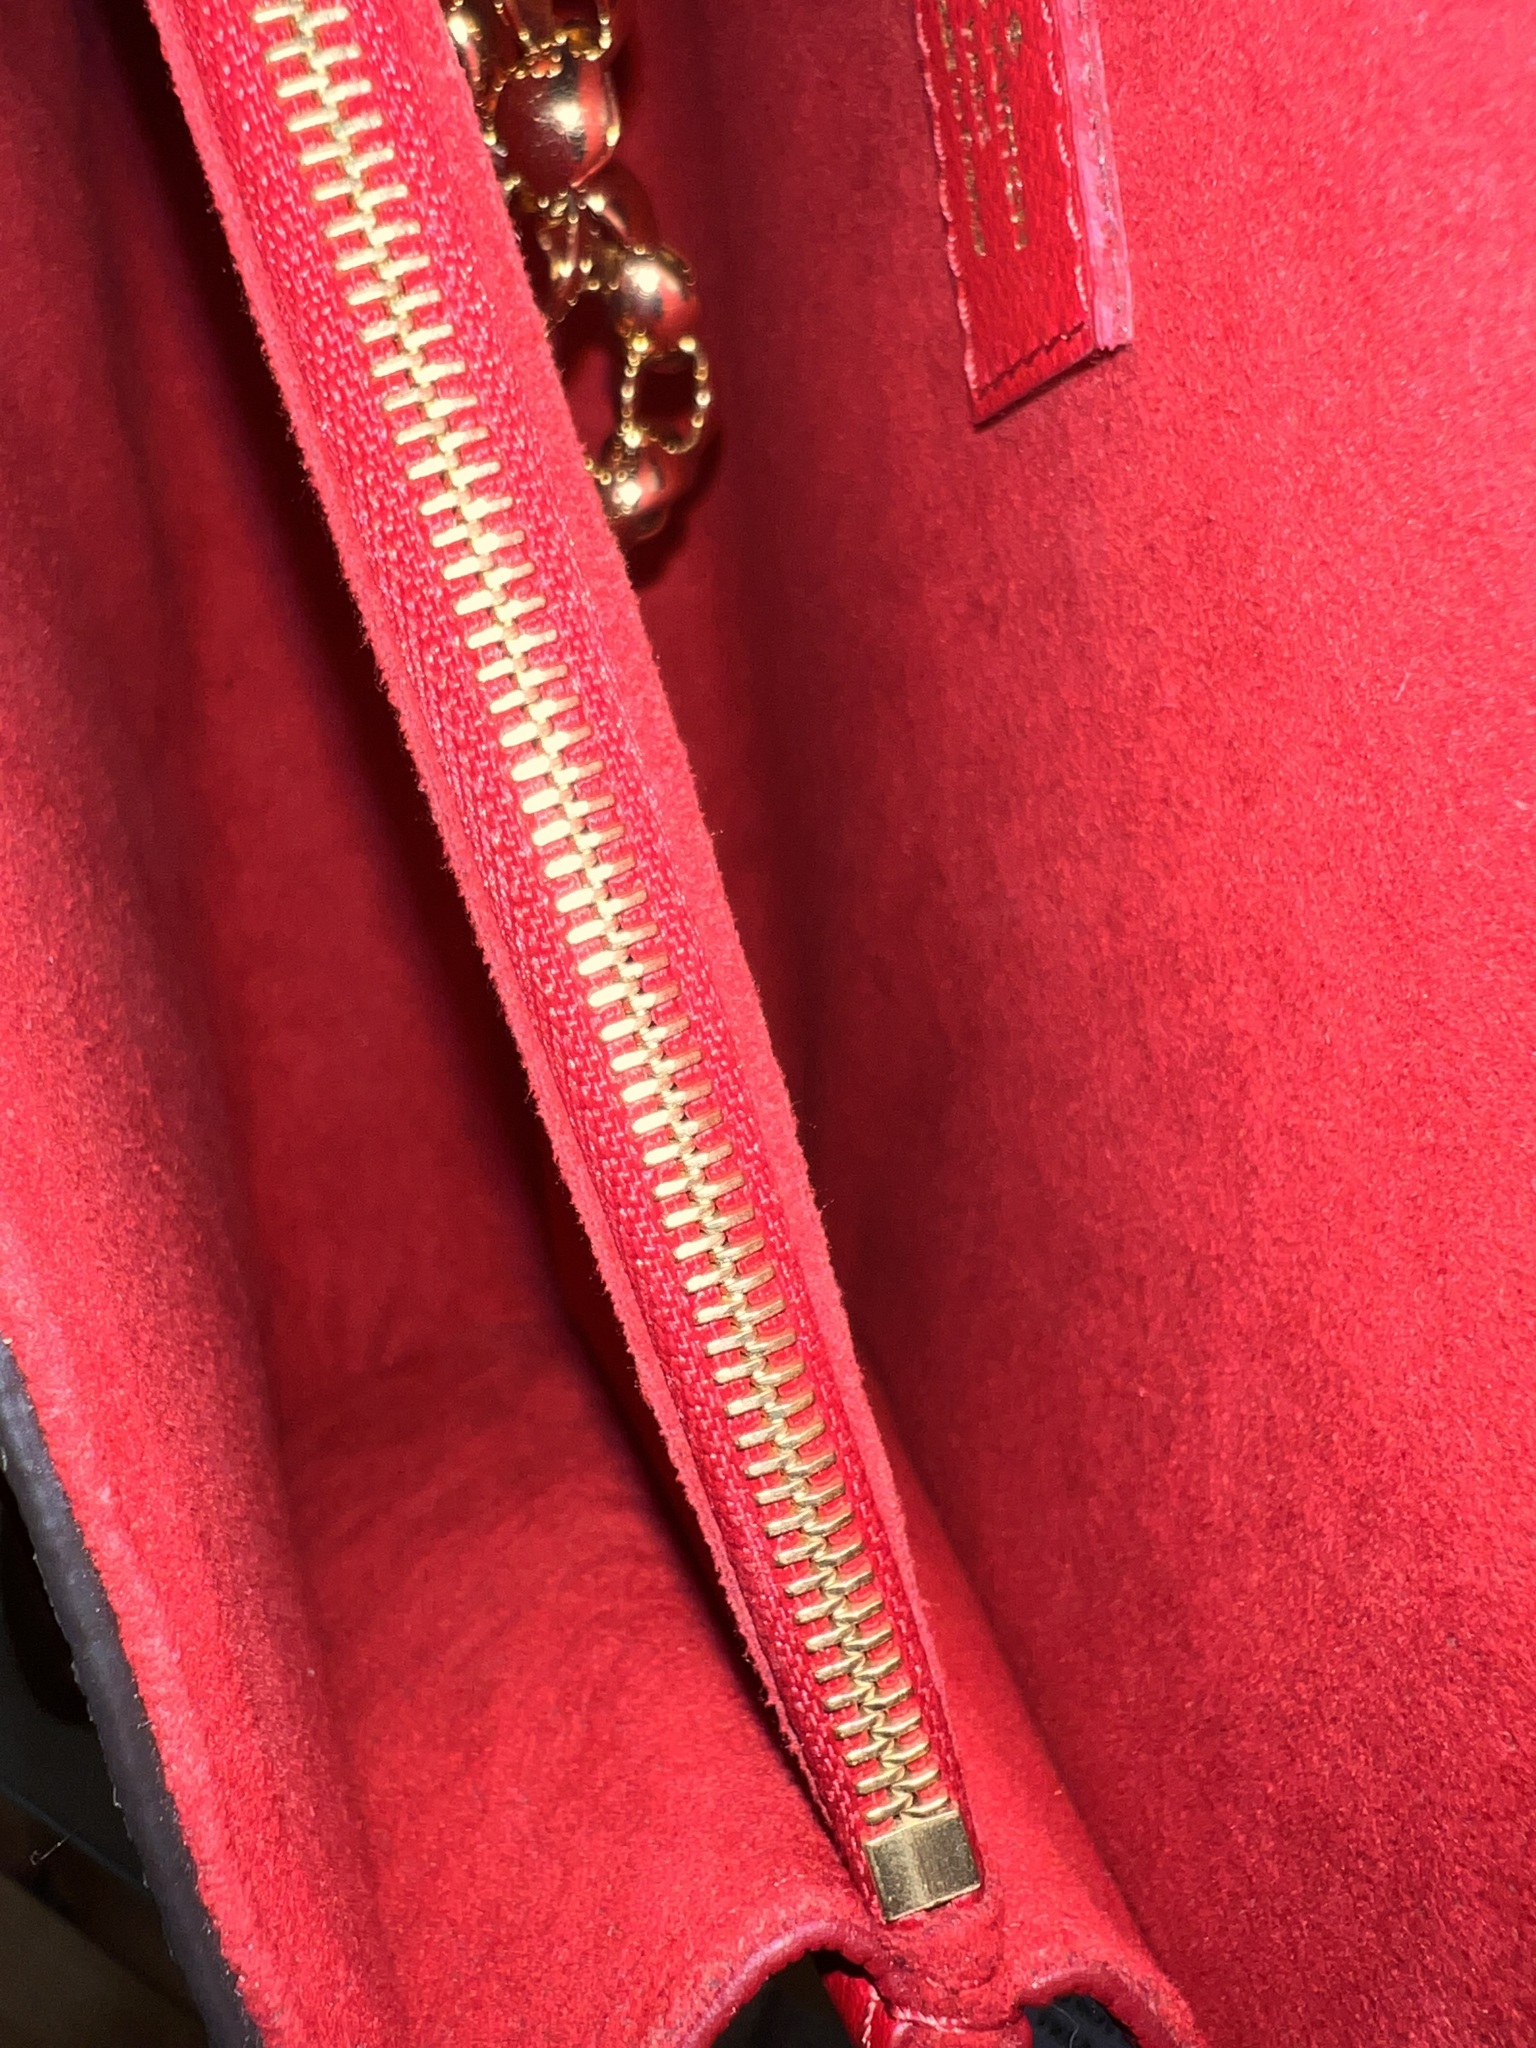 Louis Vuitton Cerise Monogram Canvas and Leather Victoire Bag at 1stDibs